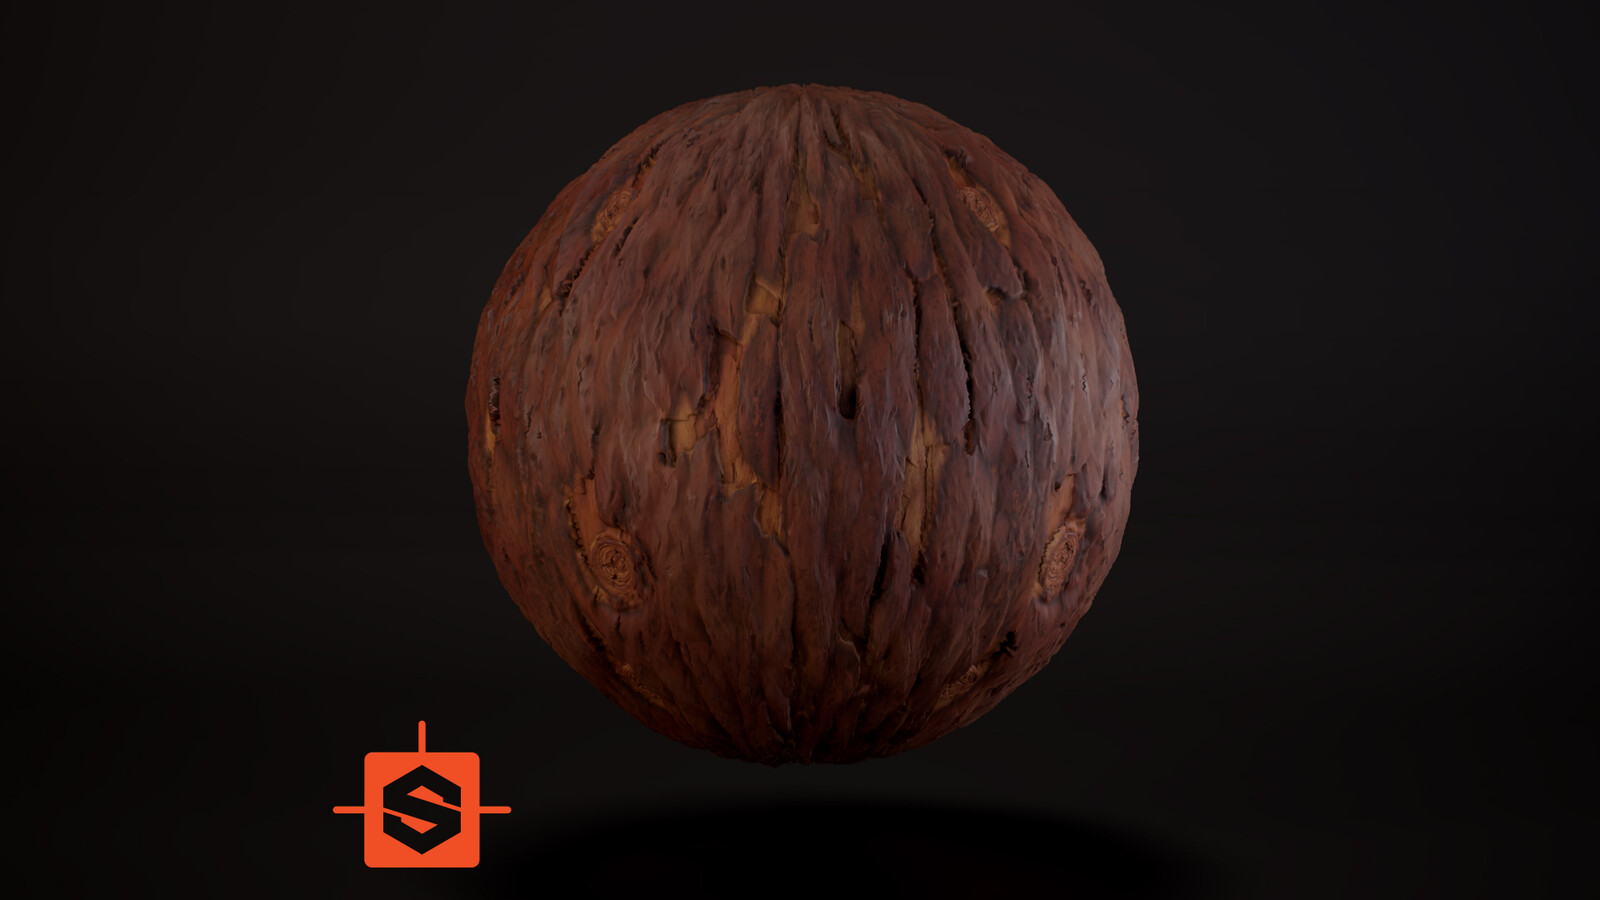 Stylized Wood Bark Material